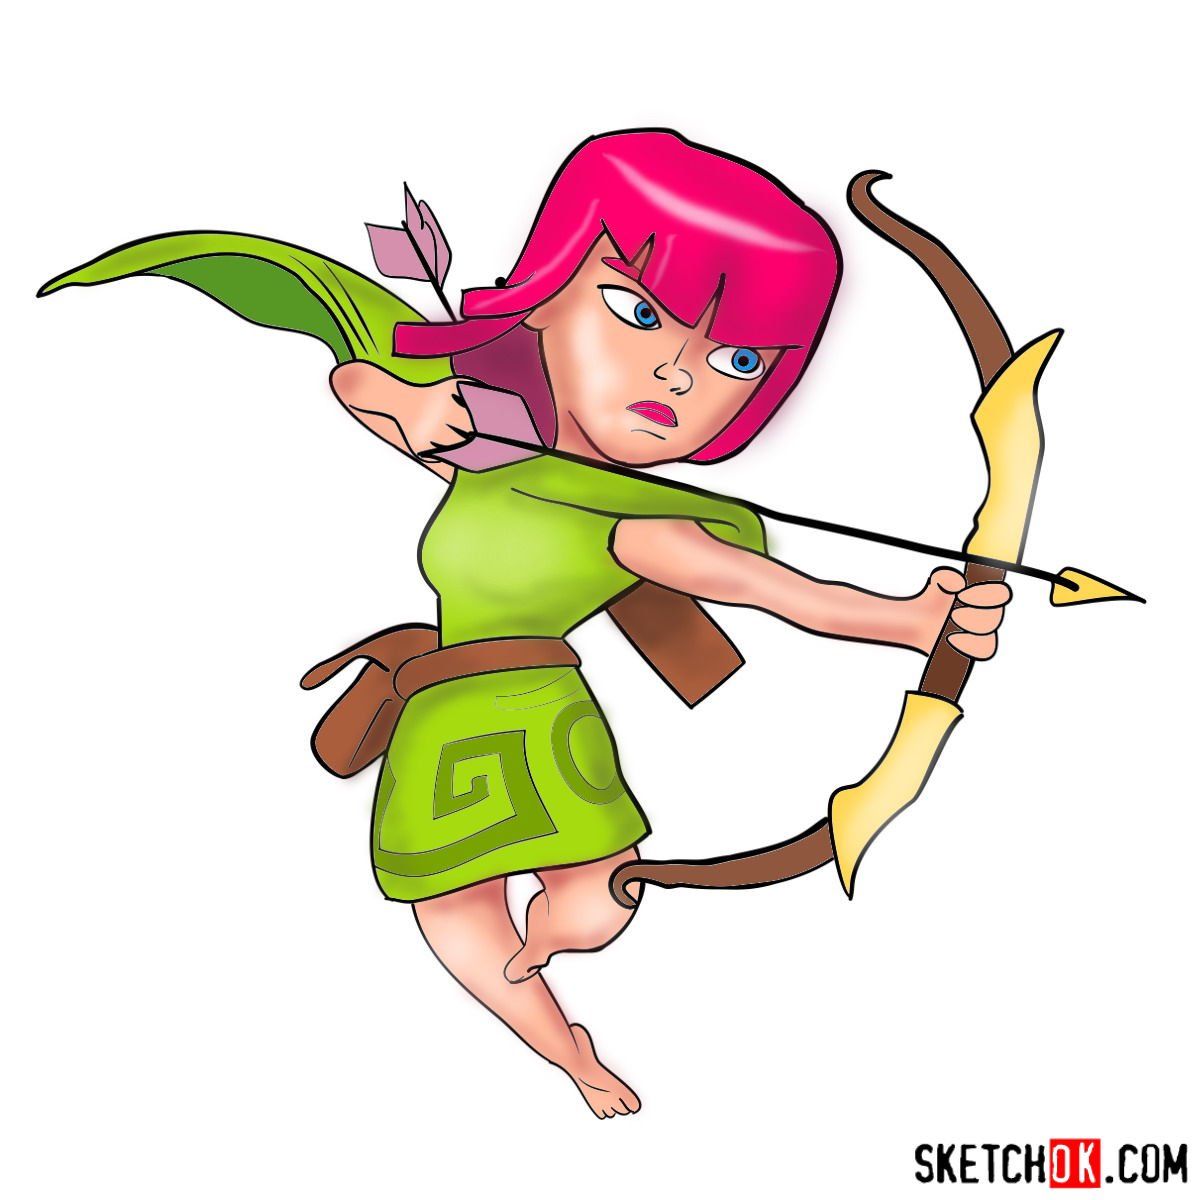 How to draw Archer from Clash of Clans